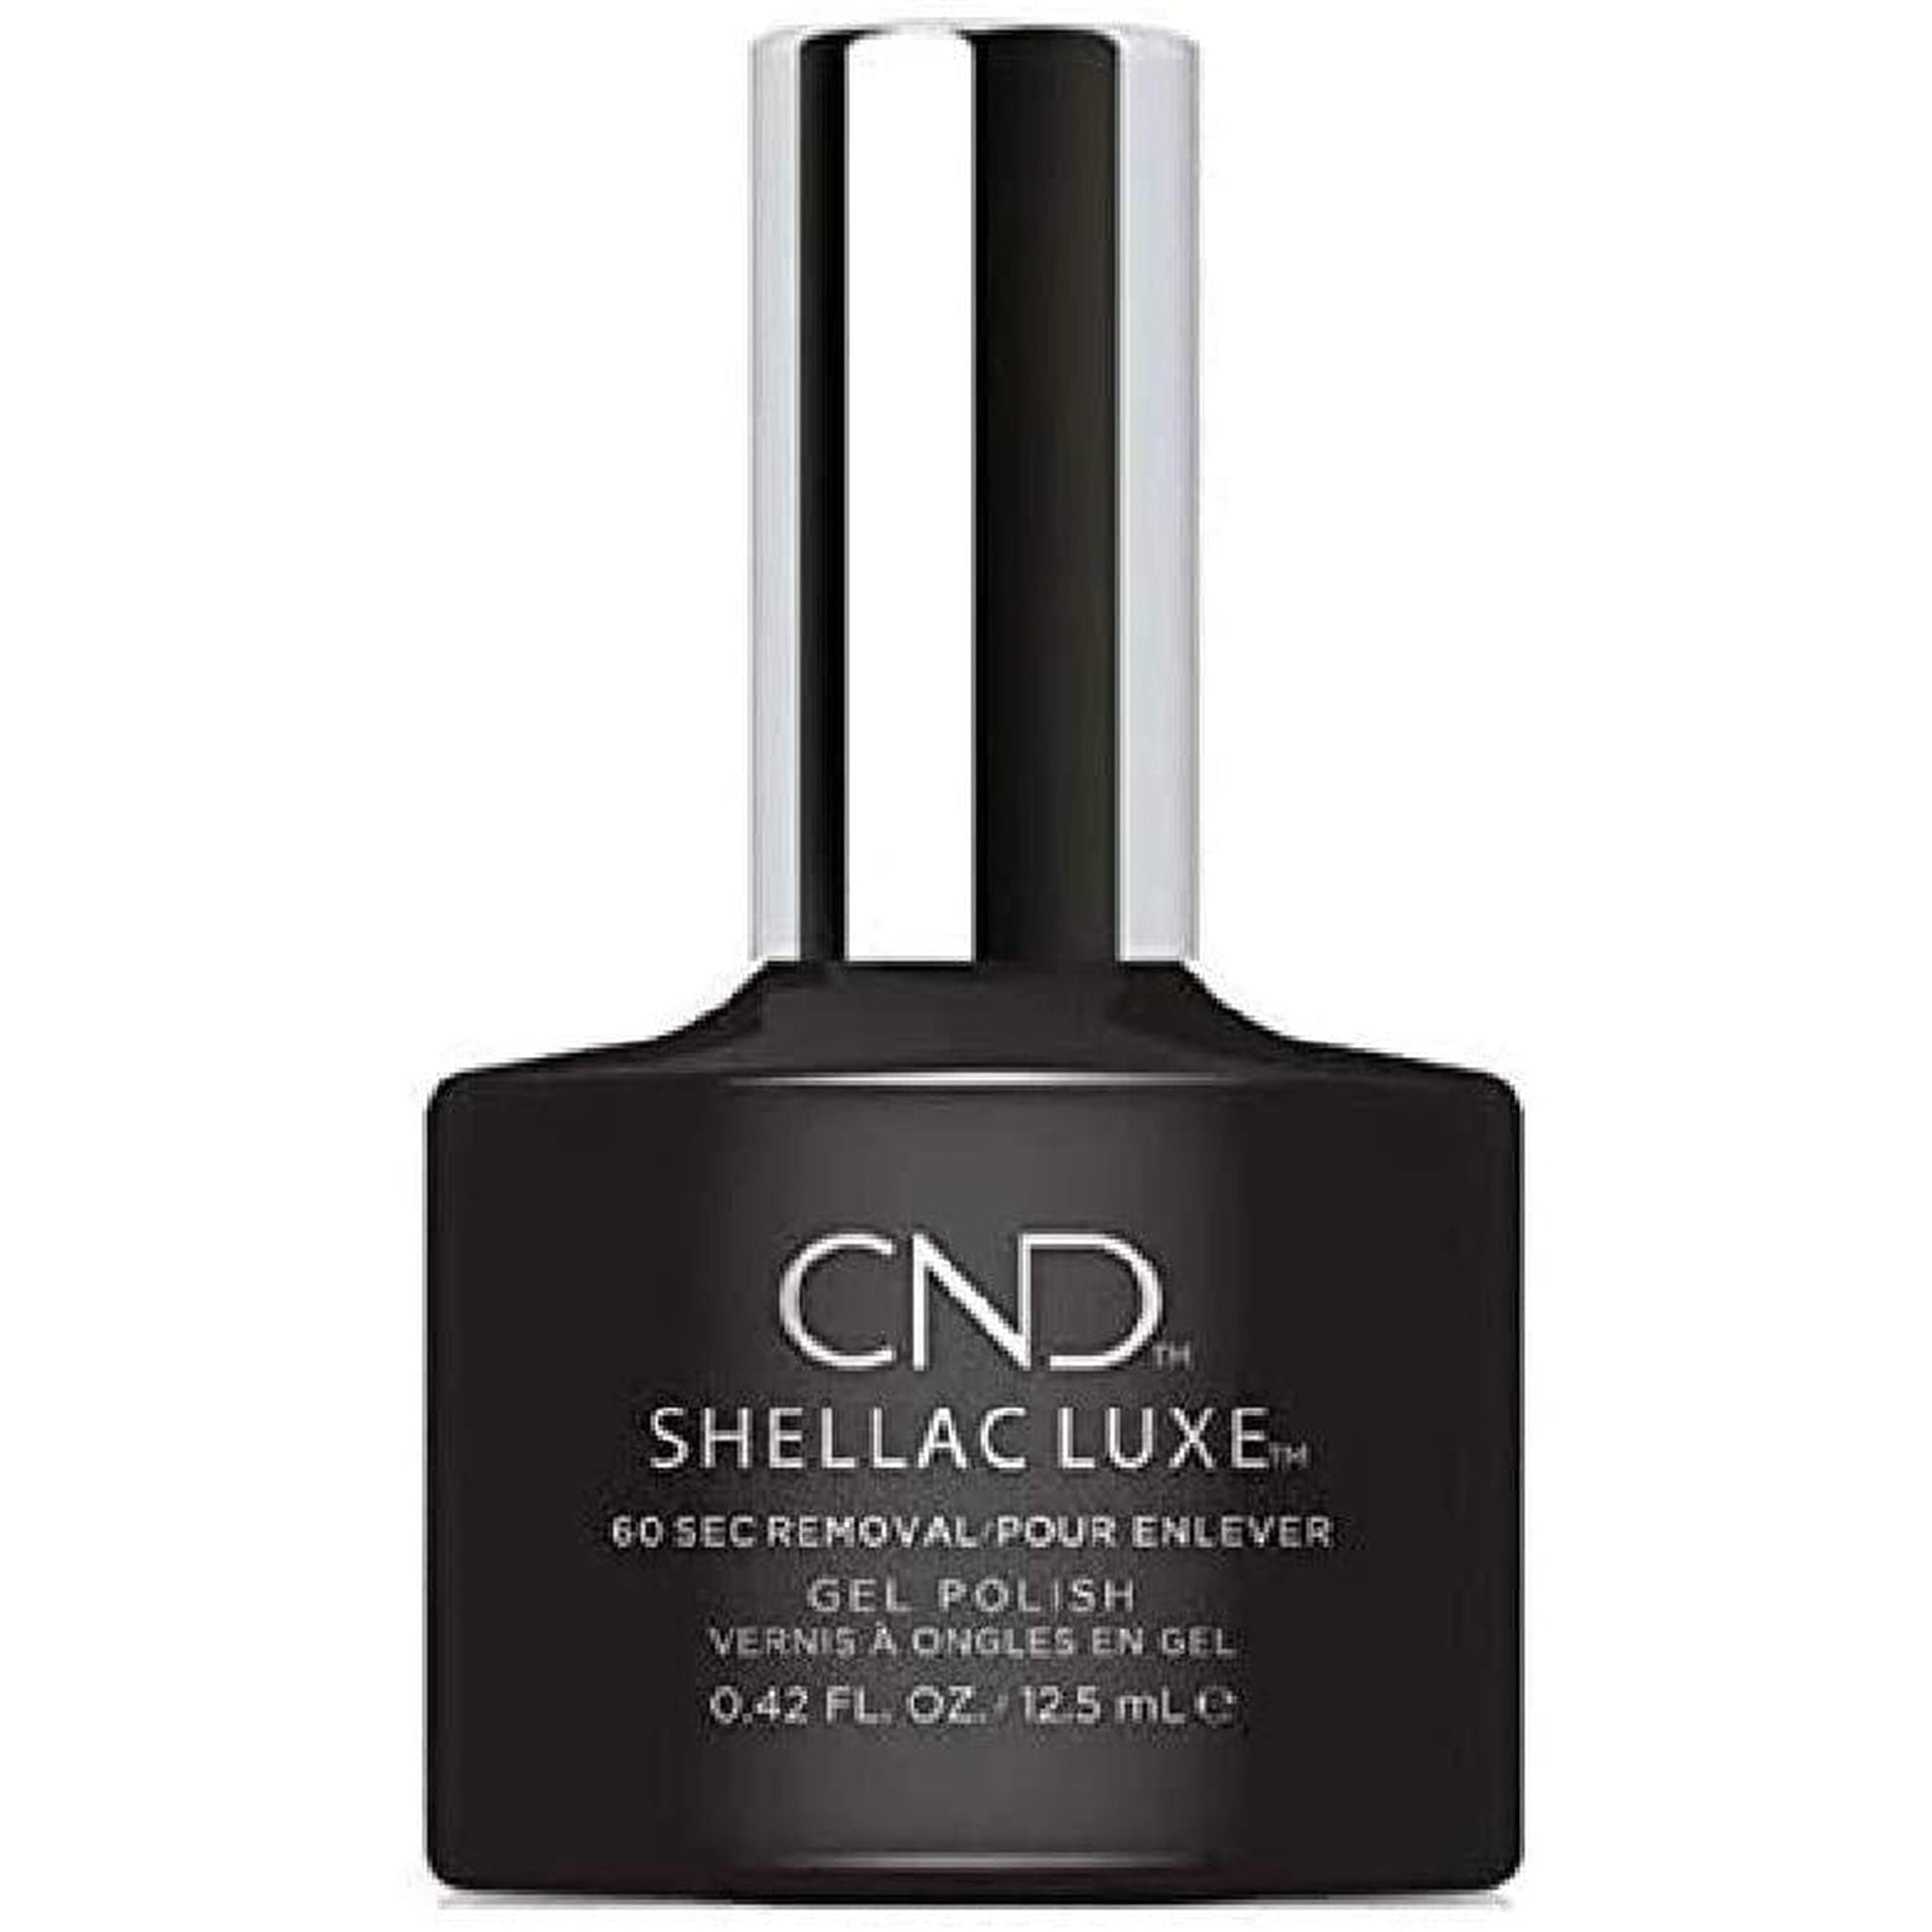 CND Shellac Luxe Gel Polish BLACK POOL #105-CND-BeautyNmakeup.co.uk